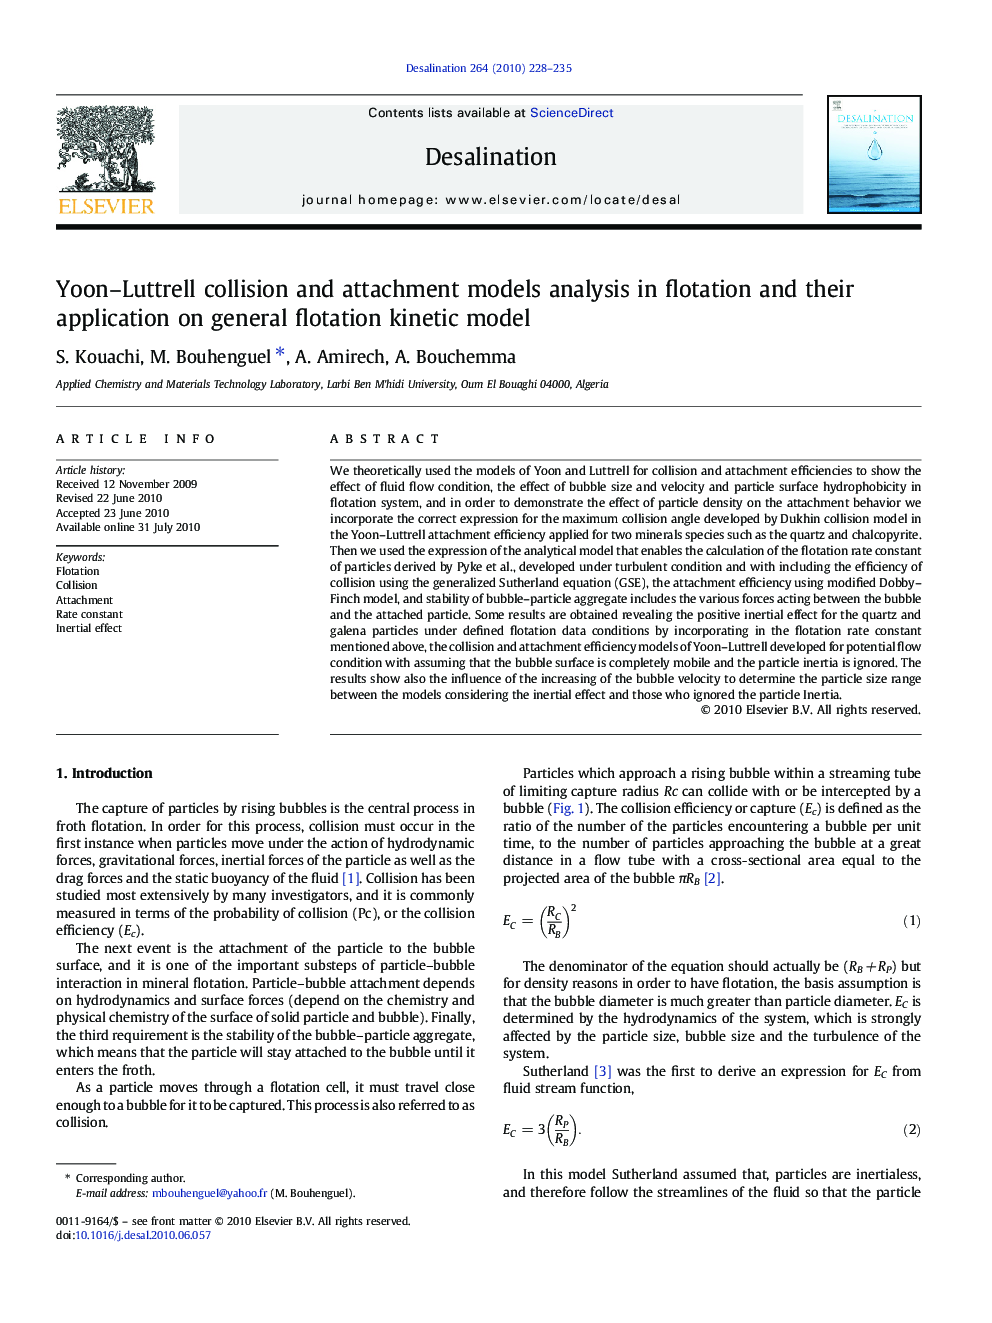 Yoon–Luttrell collision and attachment models analysis in flotation and their application on general flotation kinetic model